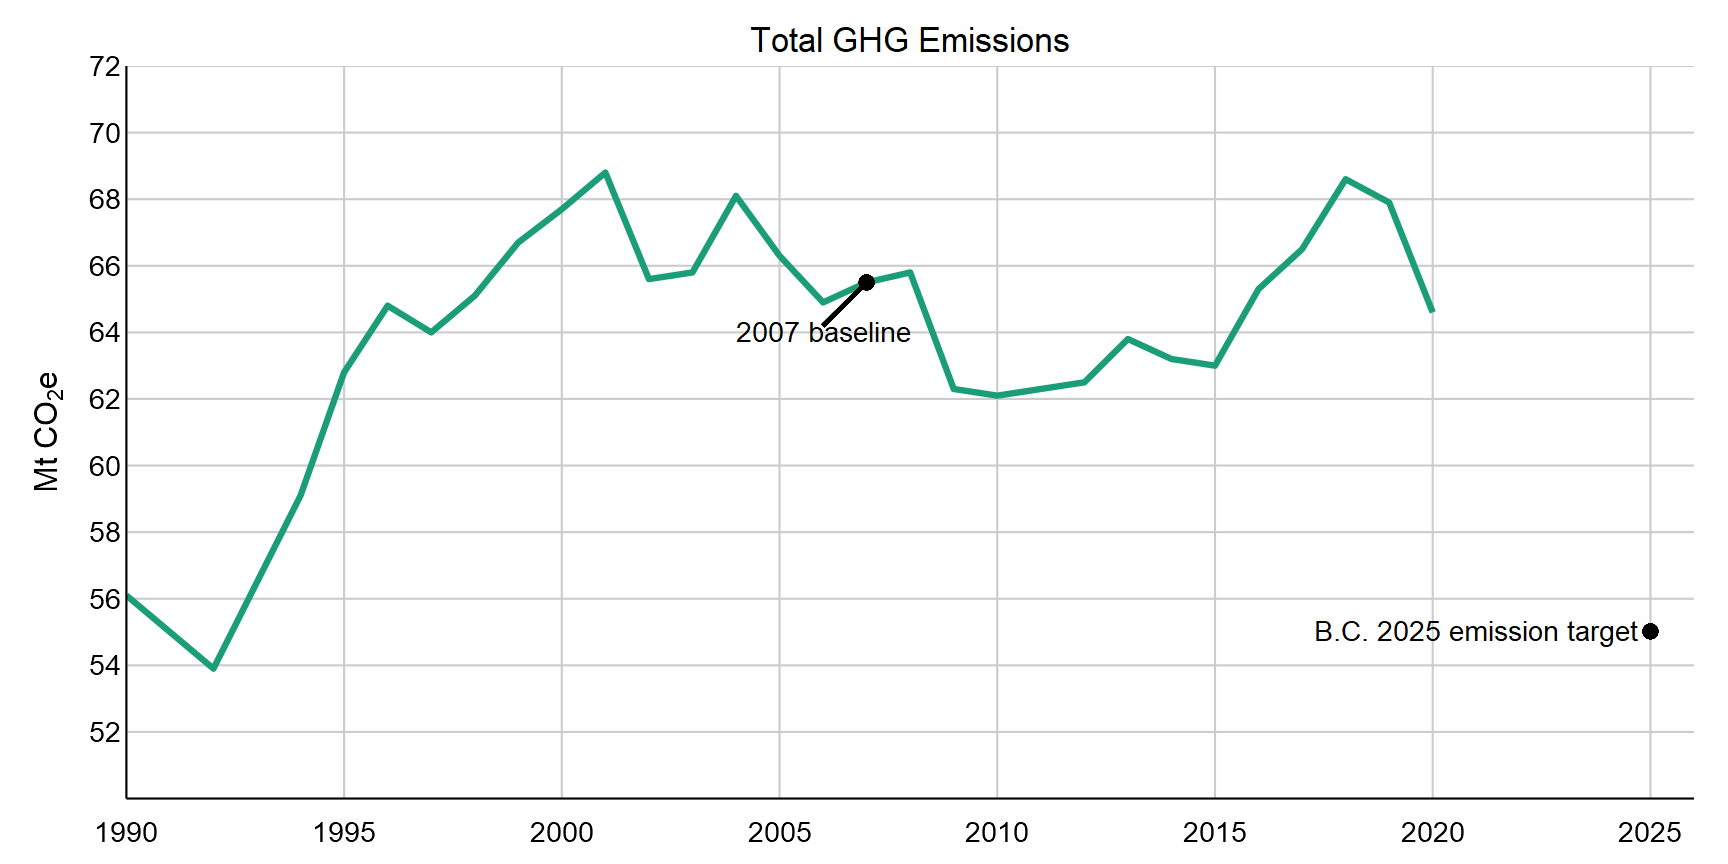 Greenhouse gas emissions plotted over time from 1990 to 2020. The 2007 baseline and the 2025 emission target are highlighted on the graph.